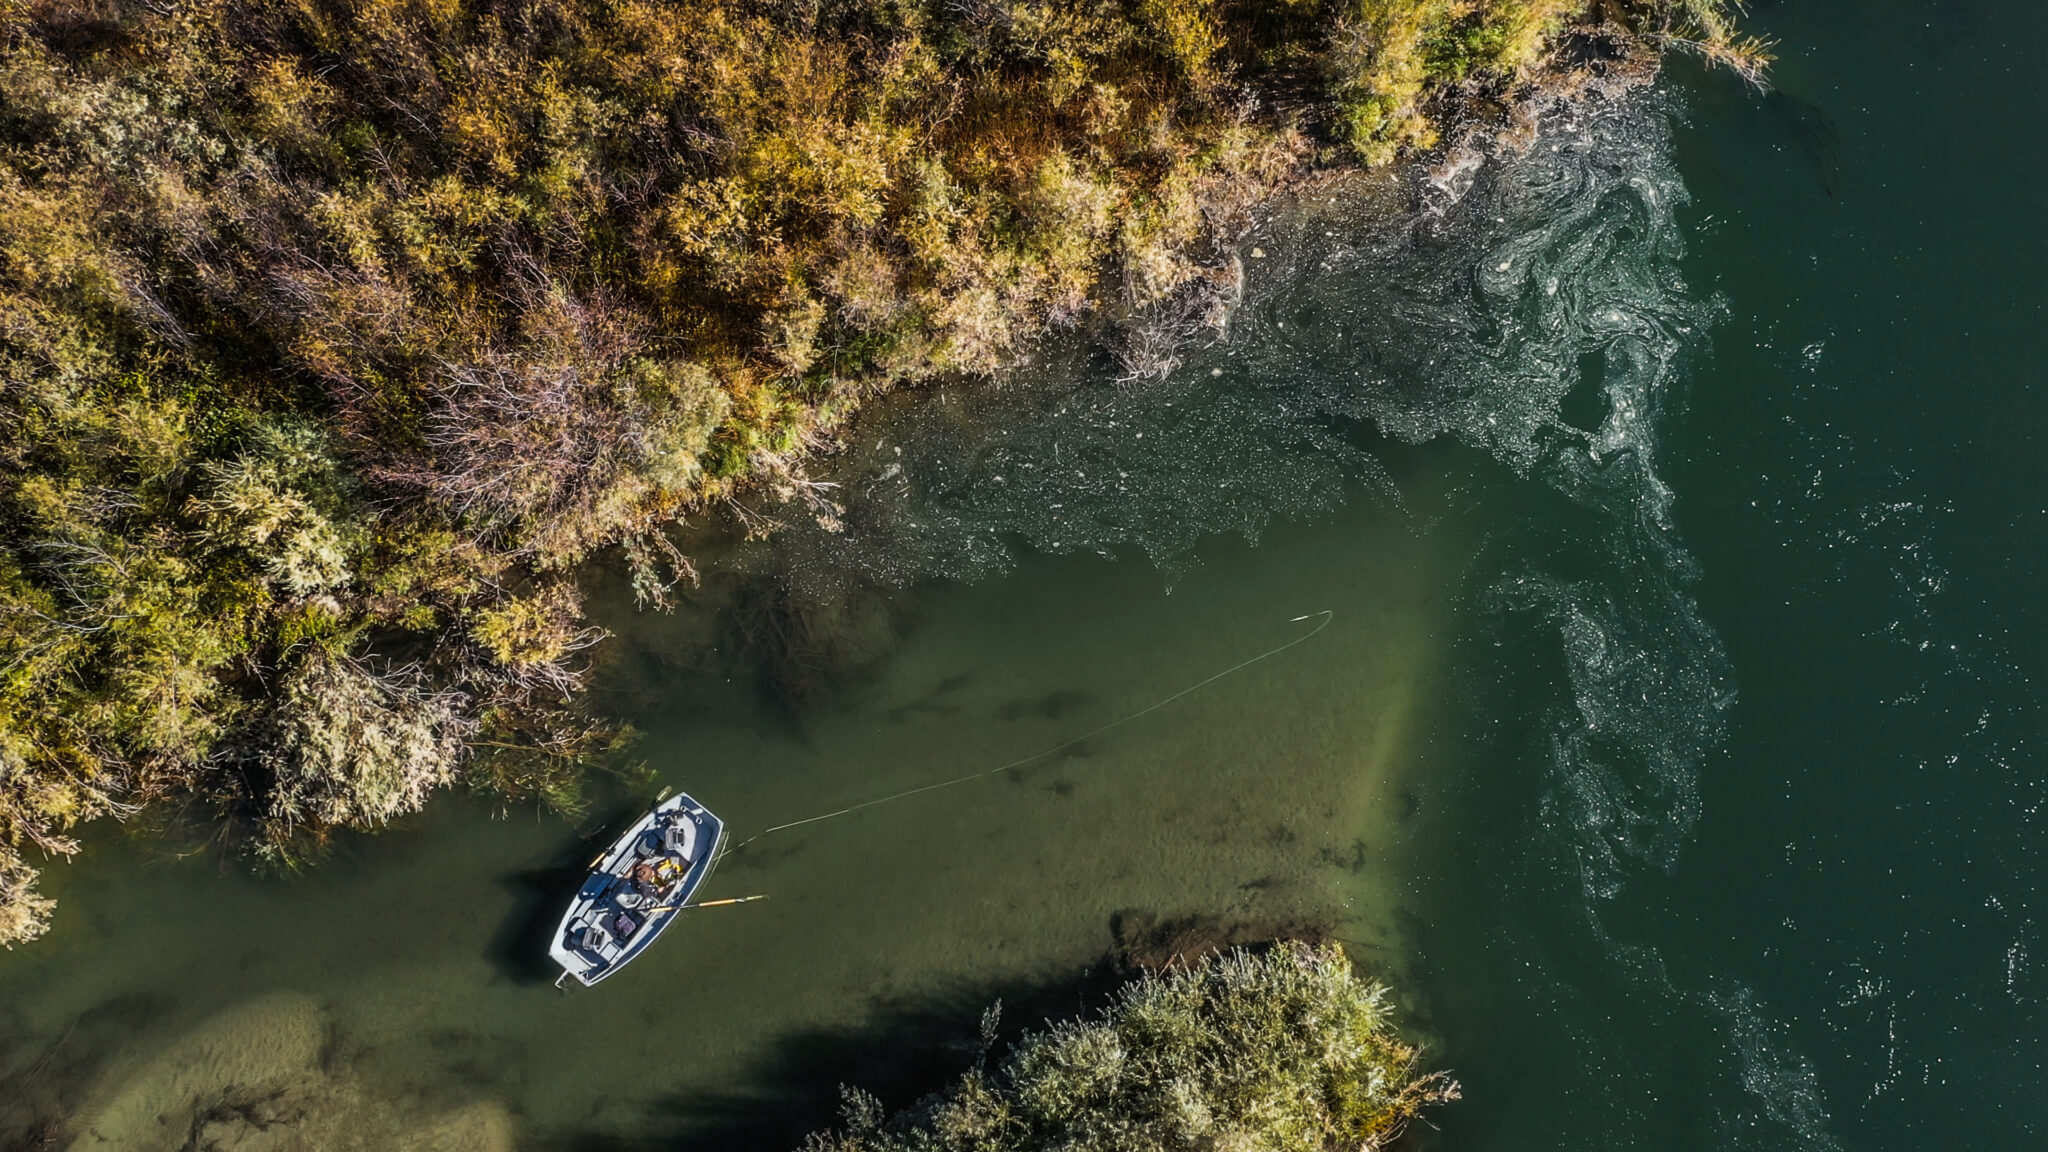 Top down view of fisherman in boat casting.